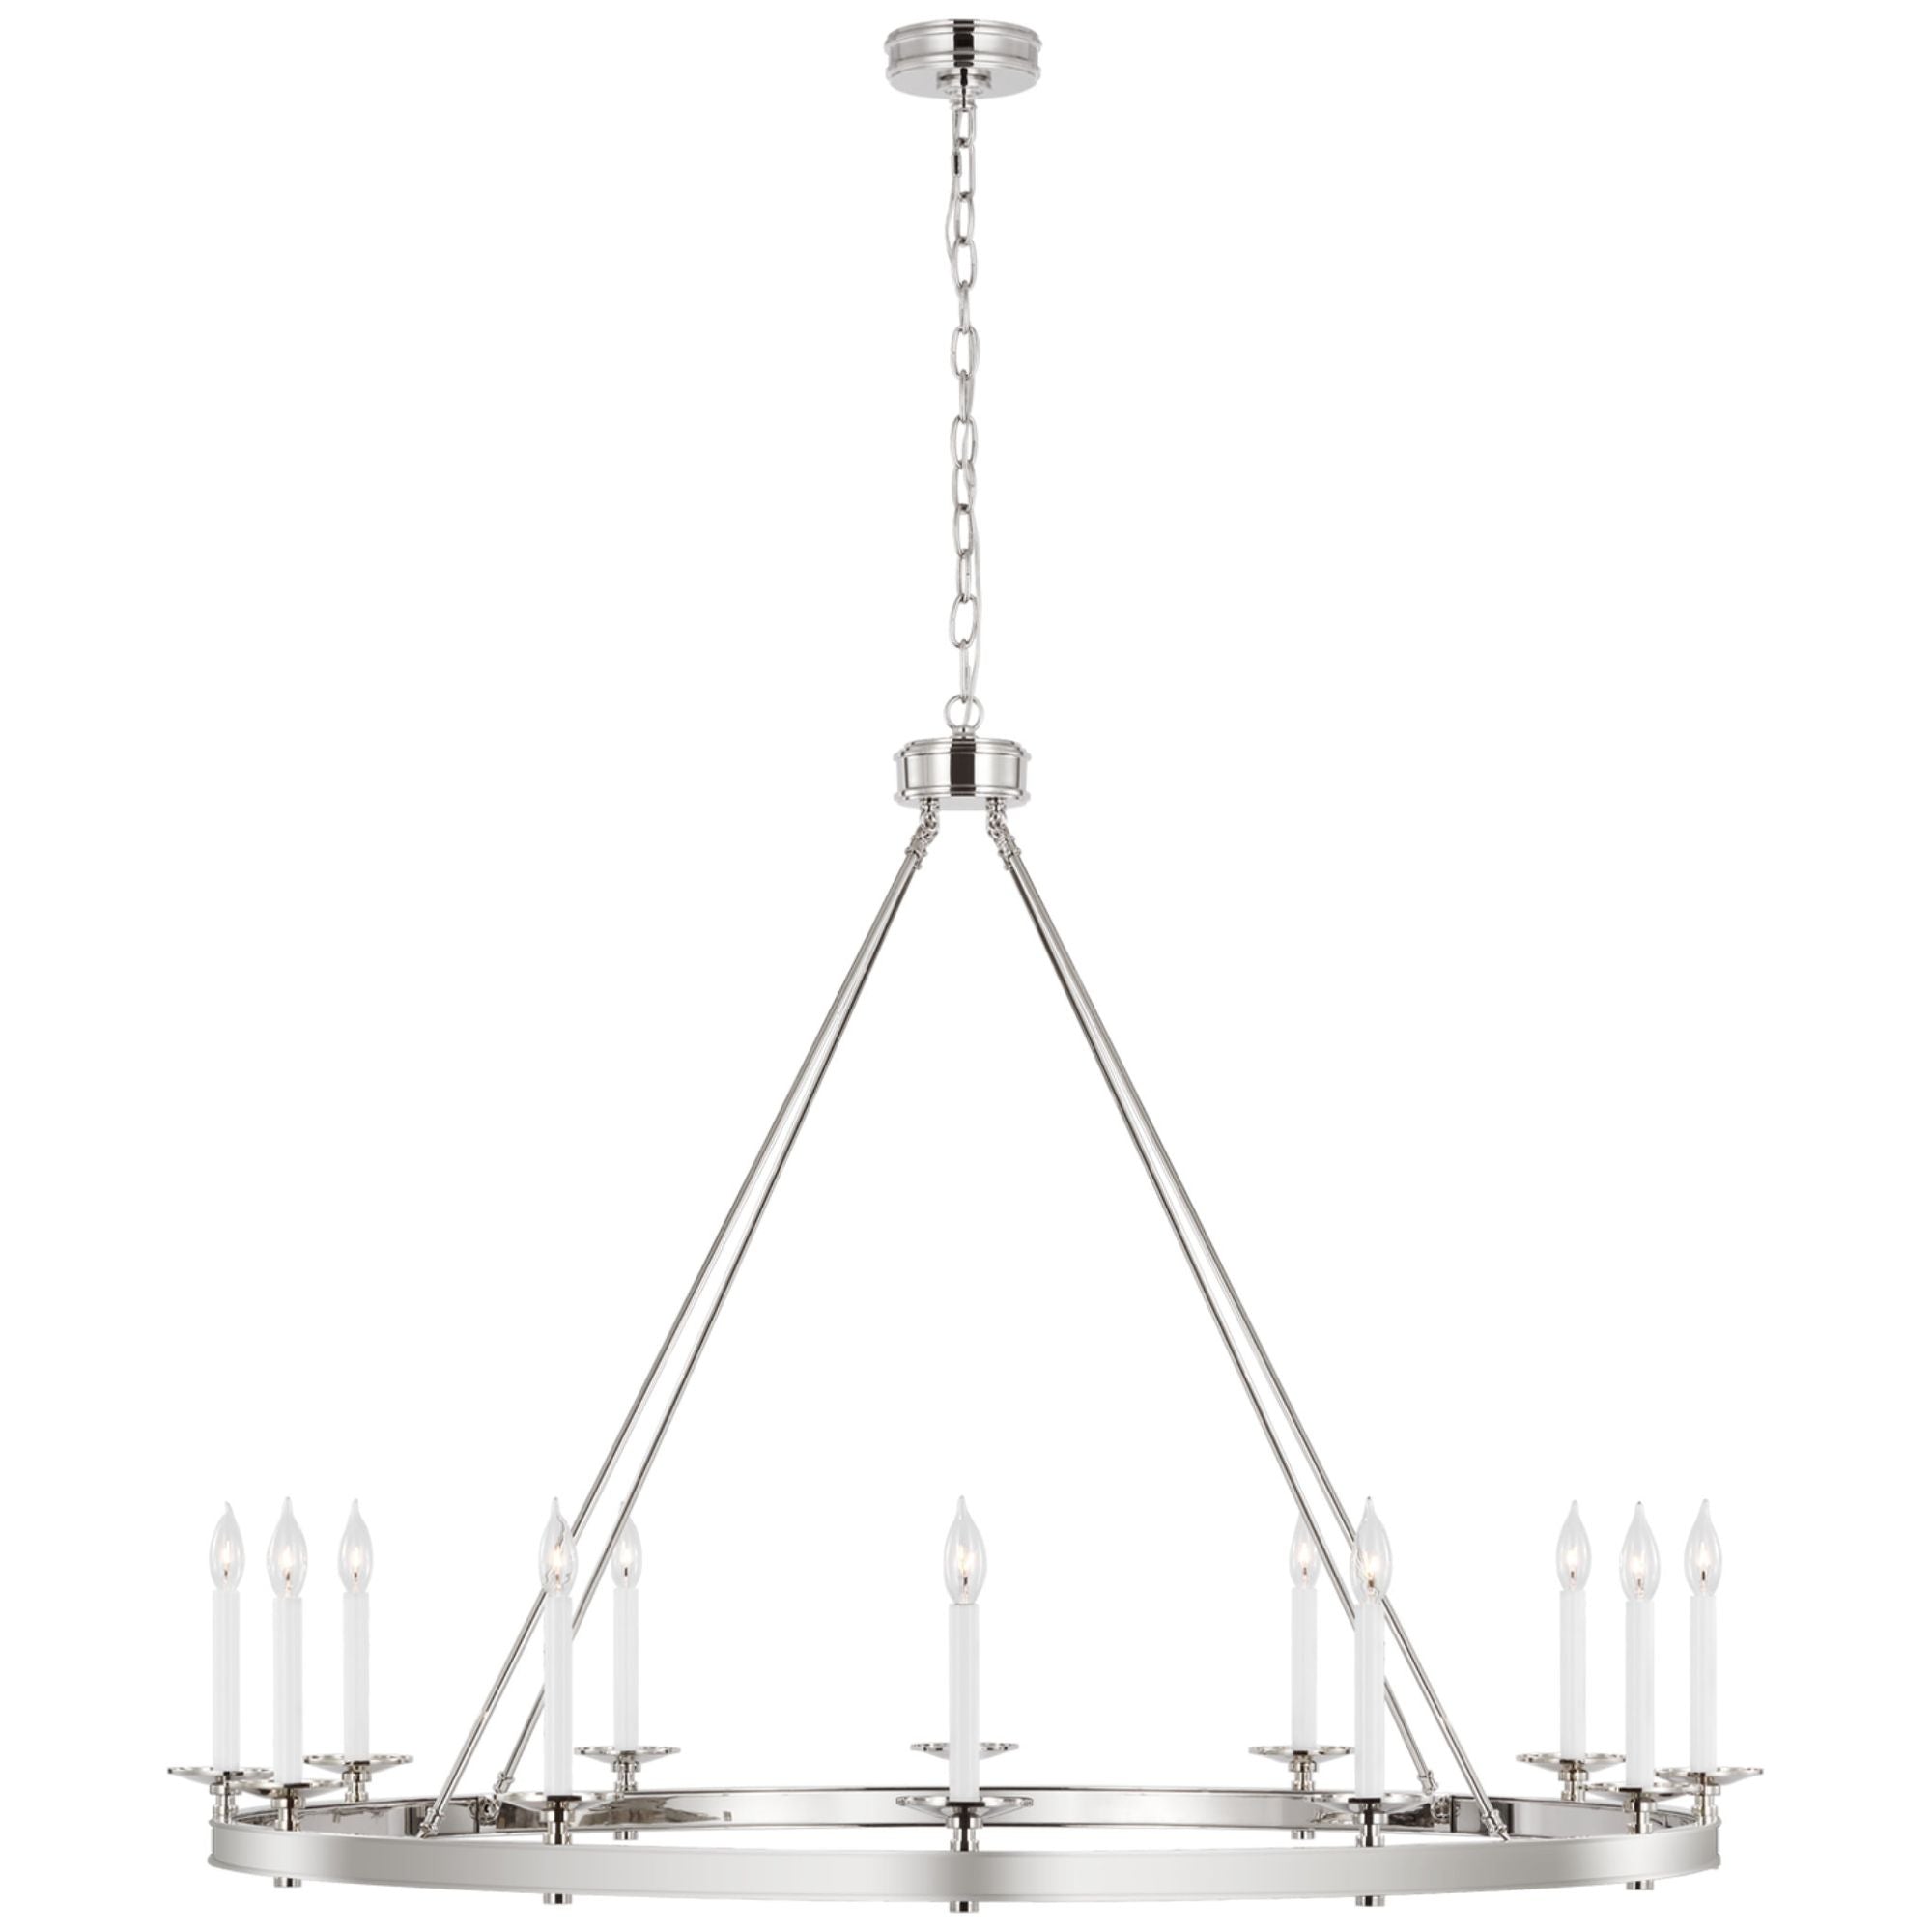 Chapman & Myers Classic Mini Ring Chandelier in Polished Nickel with N